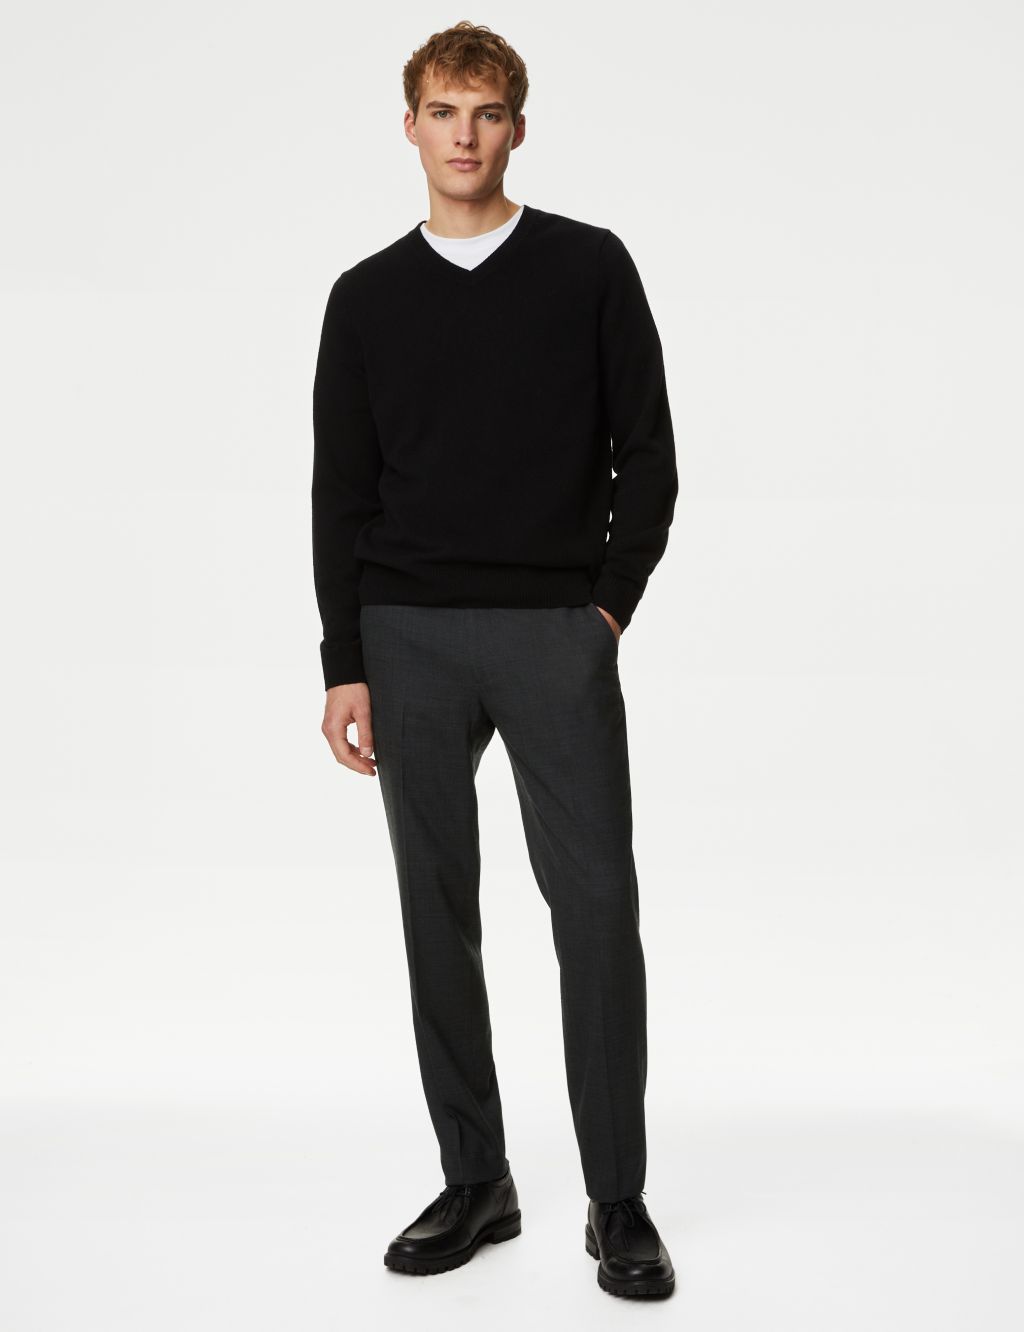 Wool Blend Flat Front Stretch Trousers image 1